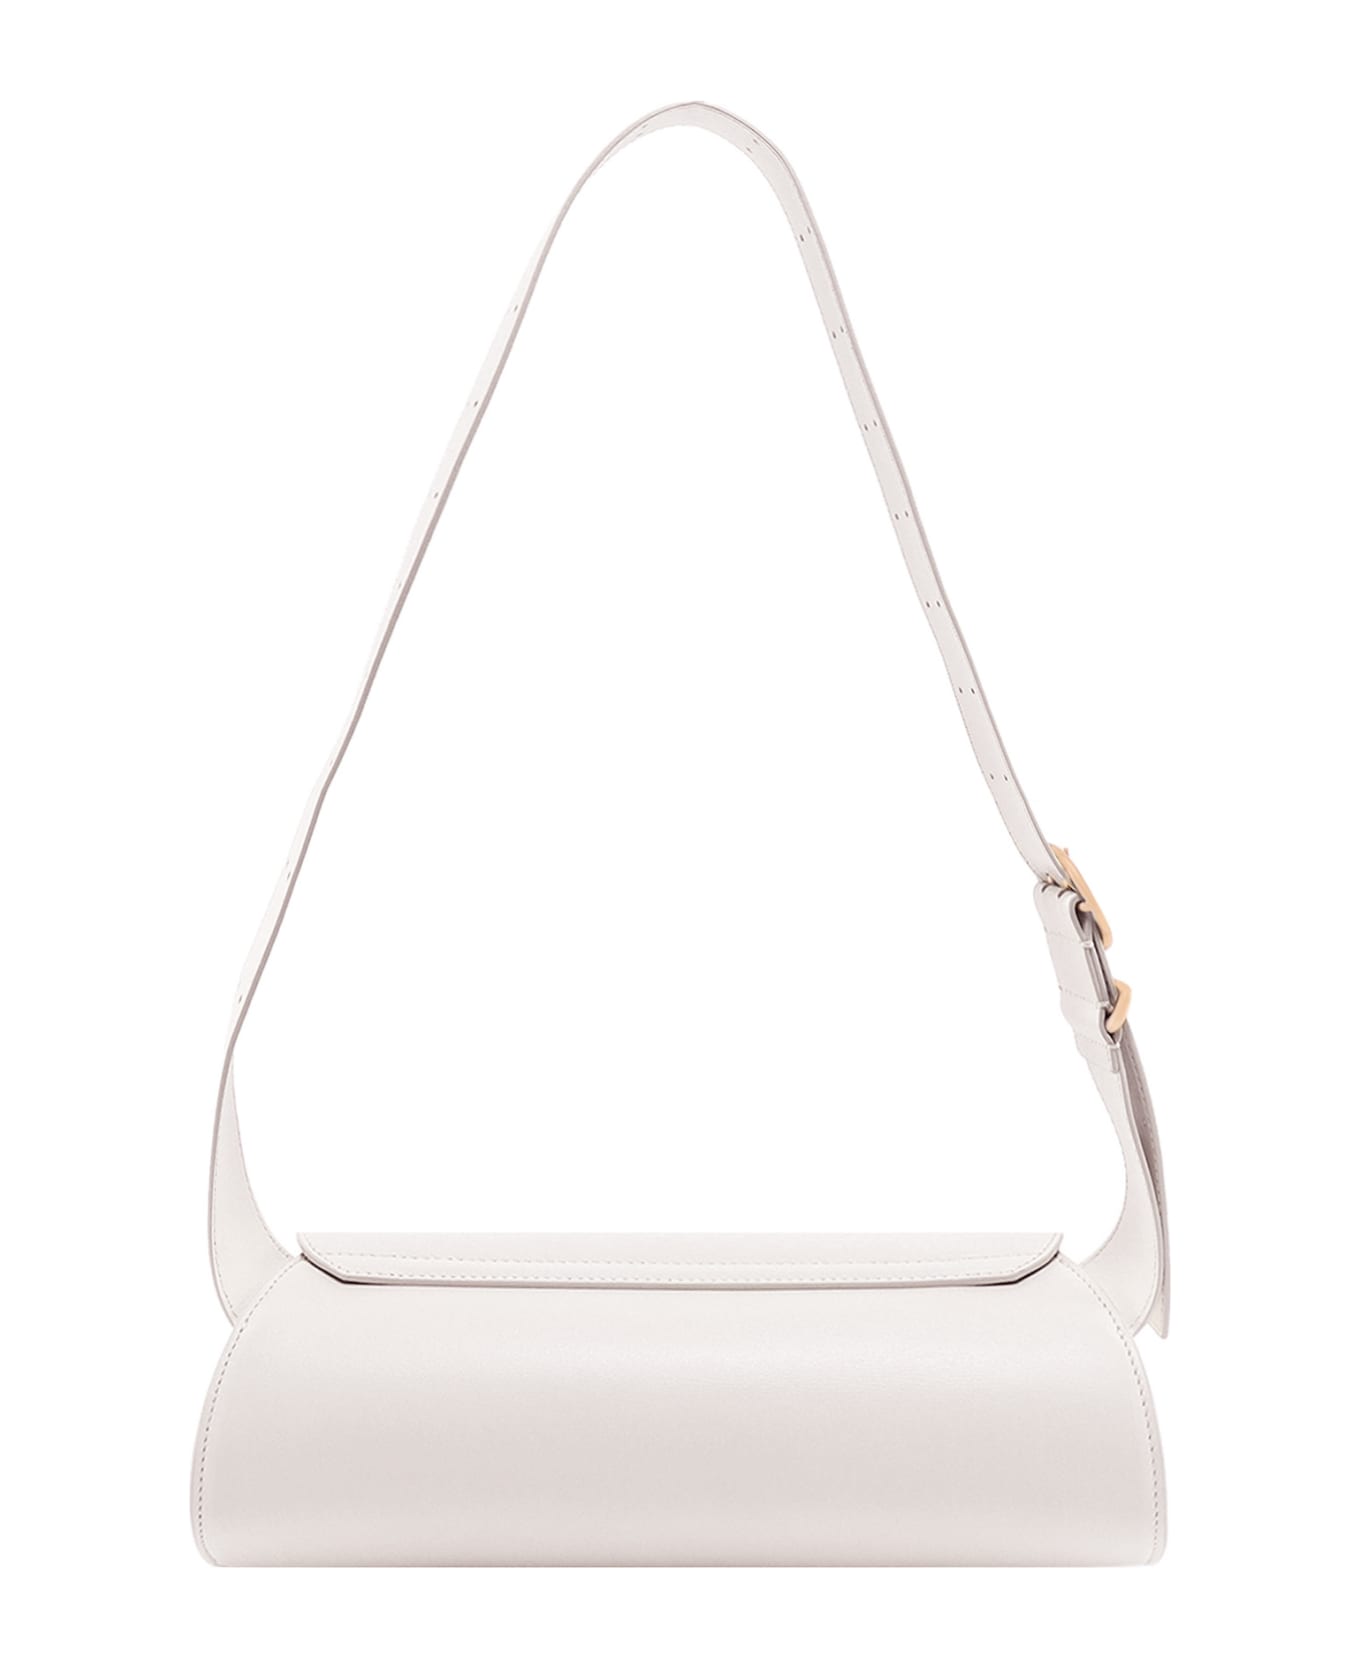 Jil Sander Cannolo Bga In White Leather - White